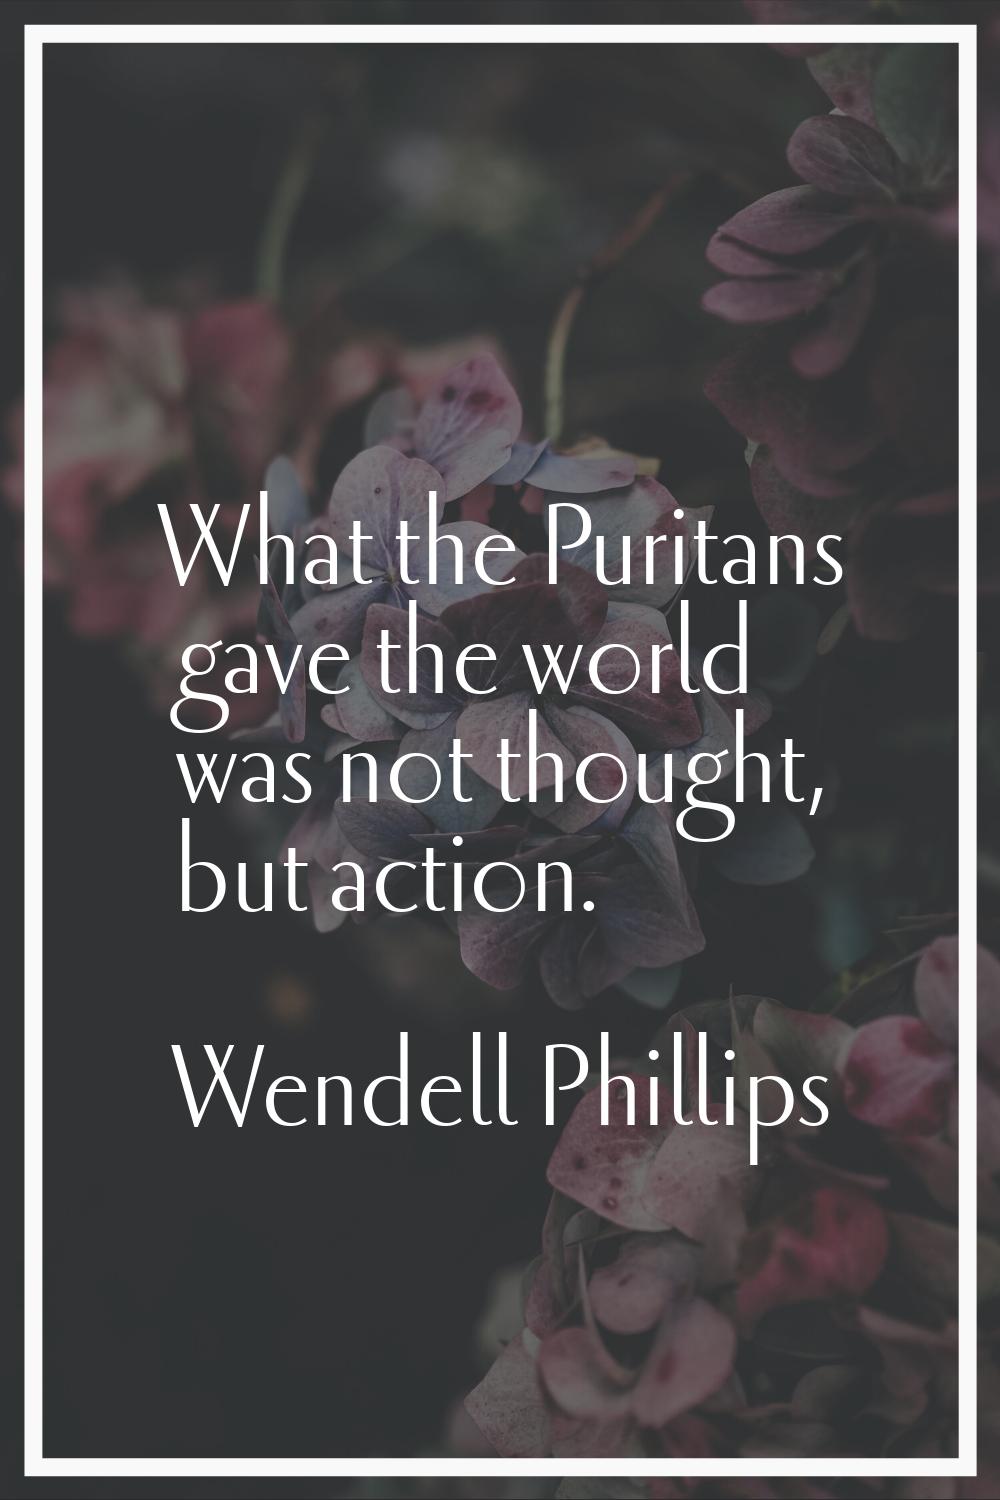 What the Puritans gave the world was not thought, but action.